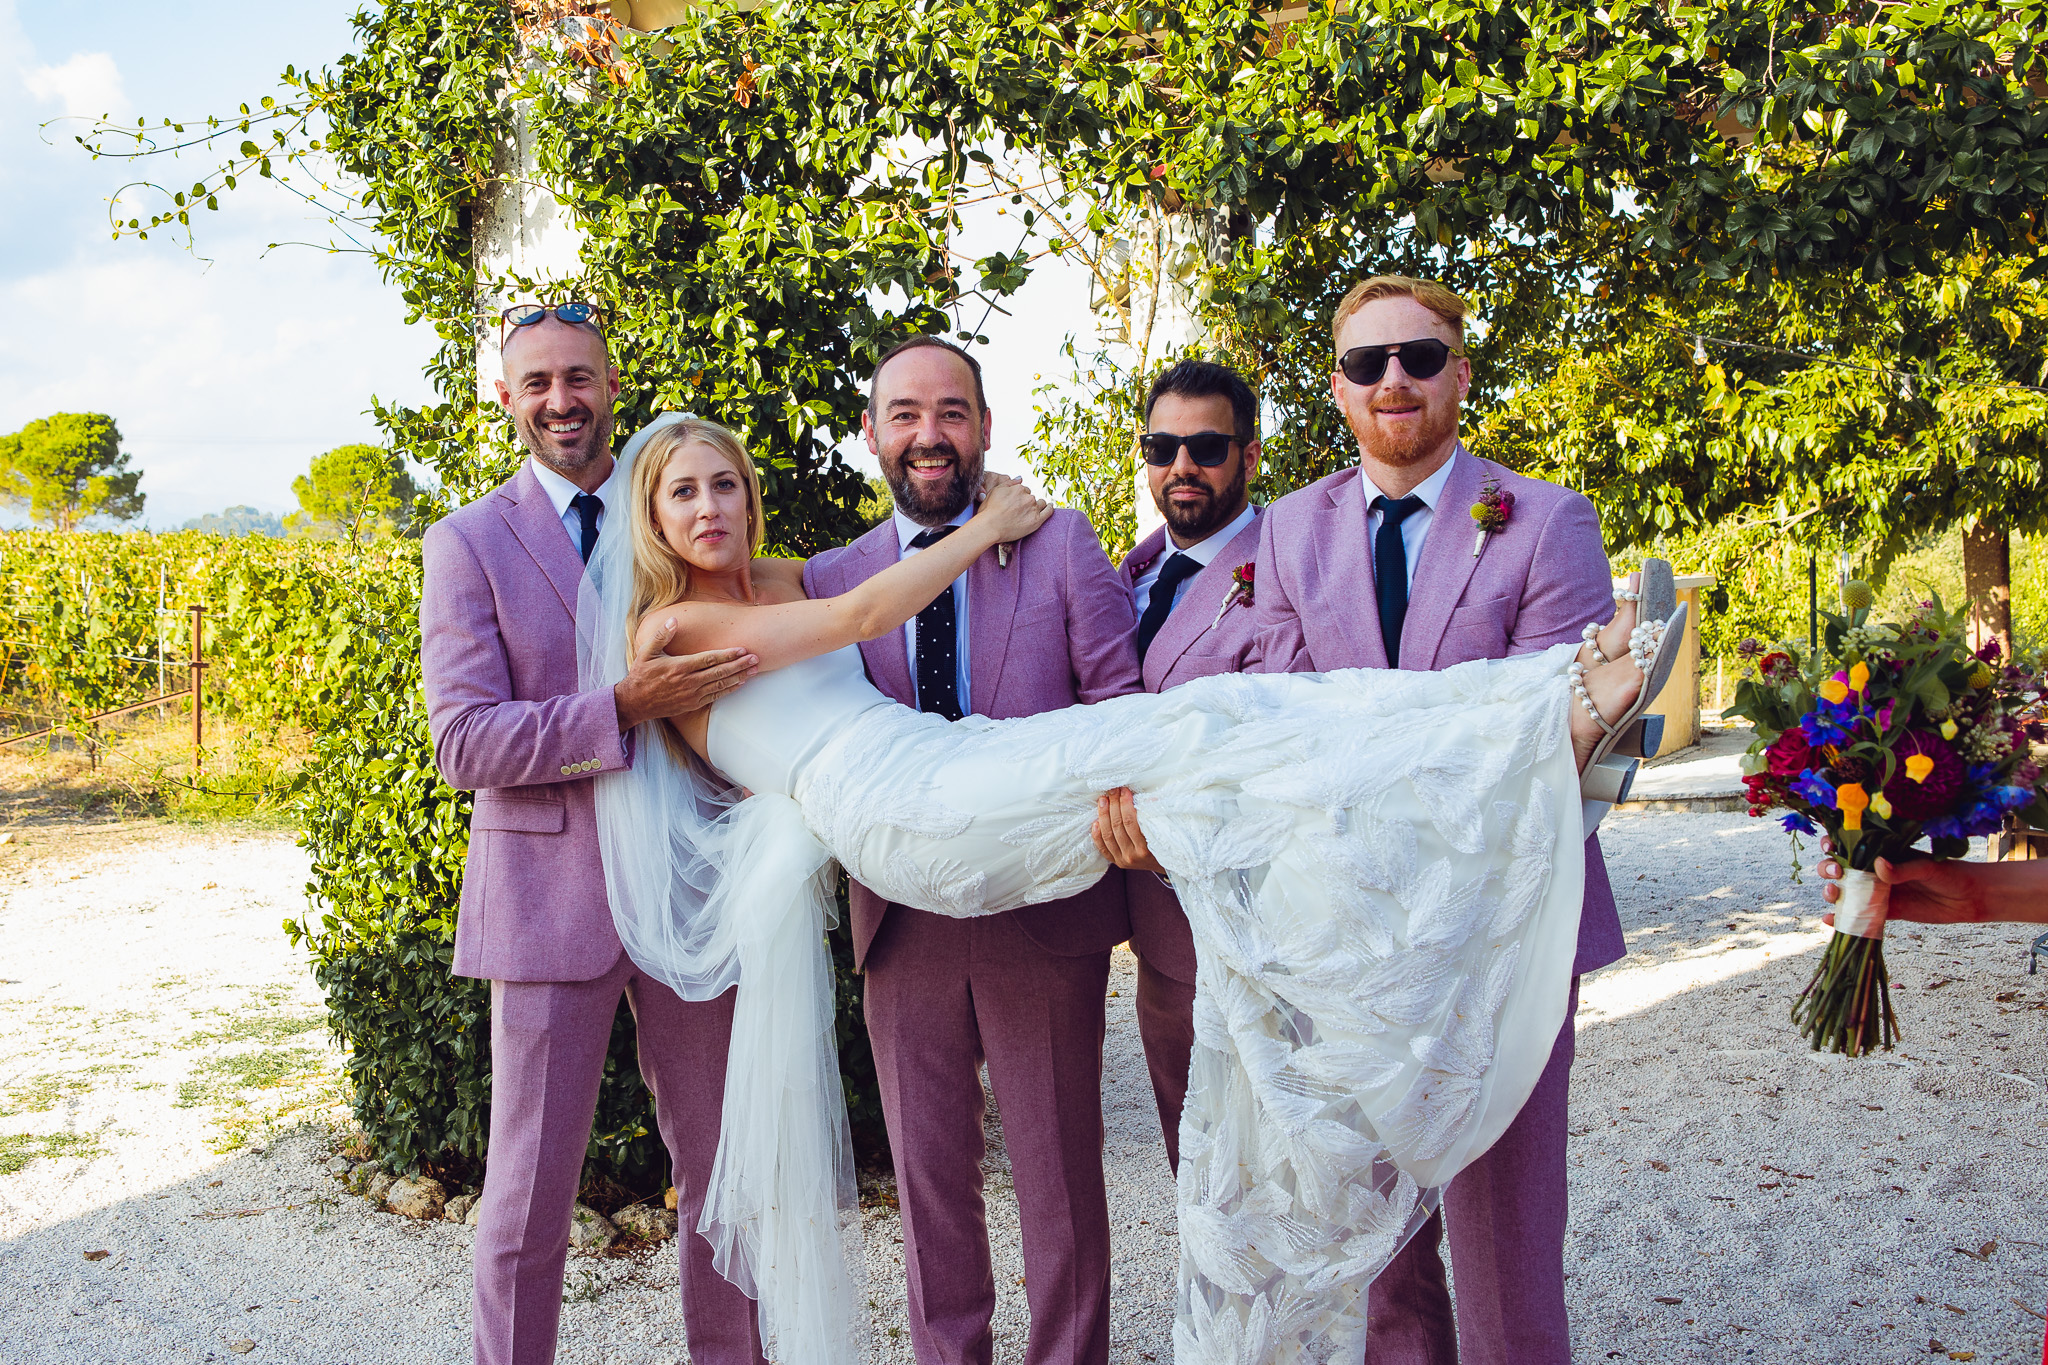 The groom and his three best men hold the bride up at a destination wedding in Ambelonas Vineyard, Corfu